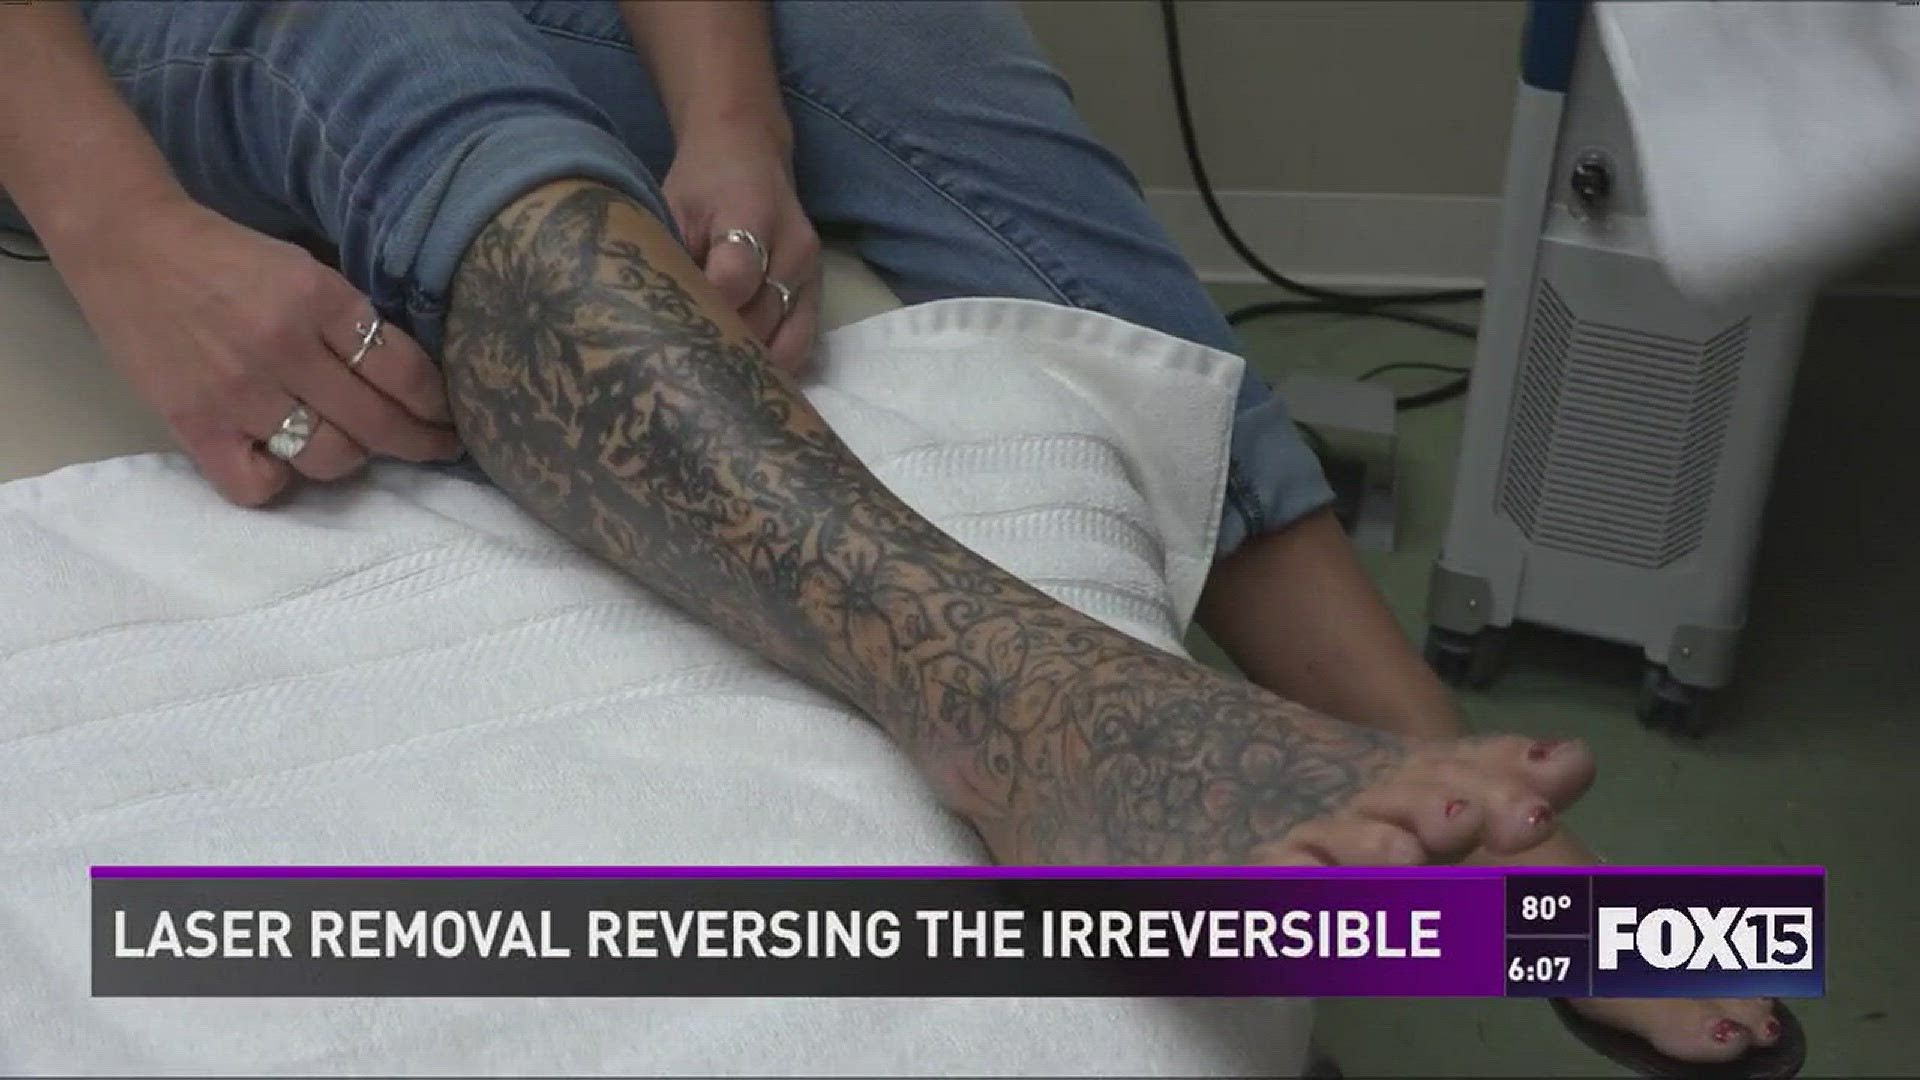 Emily Whitten starts initial treatment to have five-year-old tattoo removed.